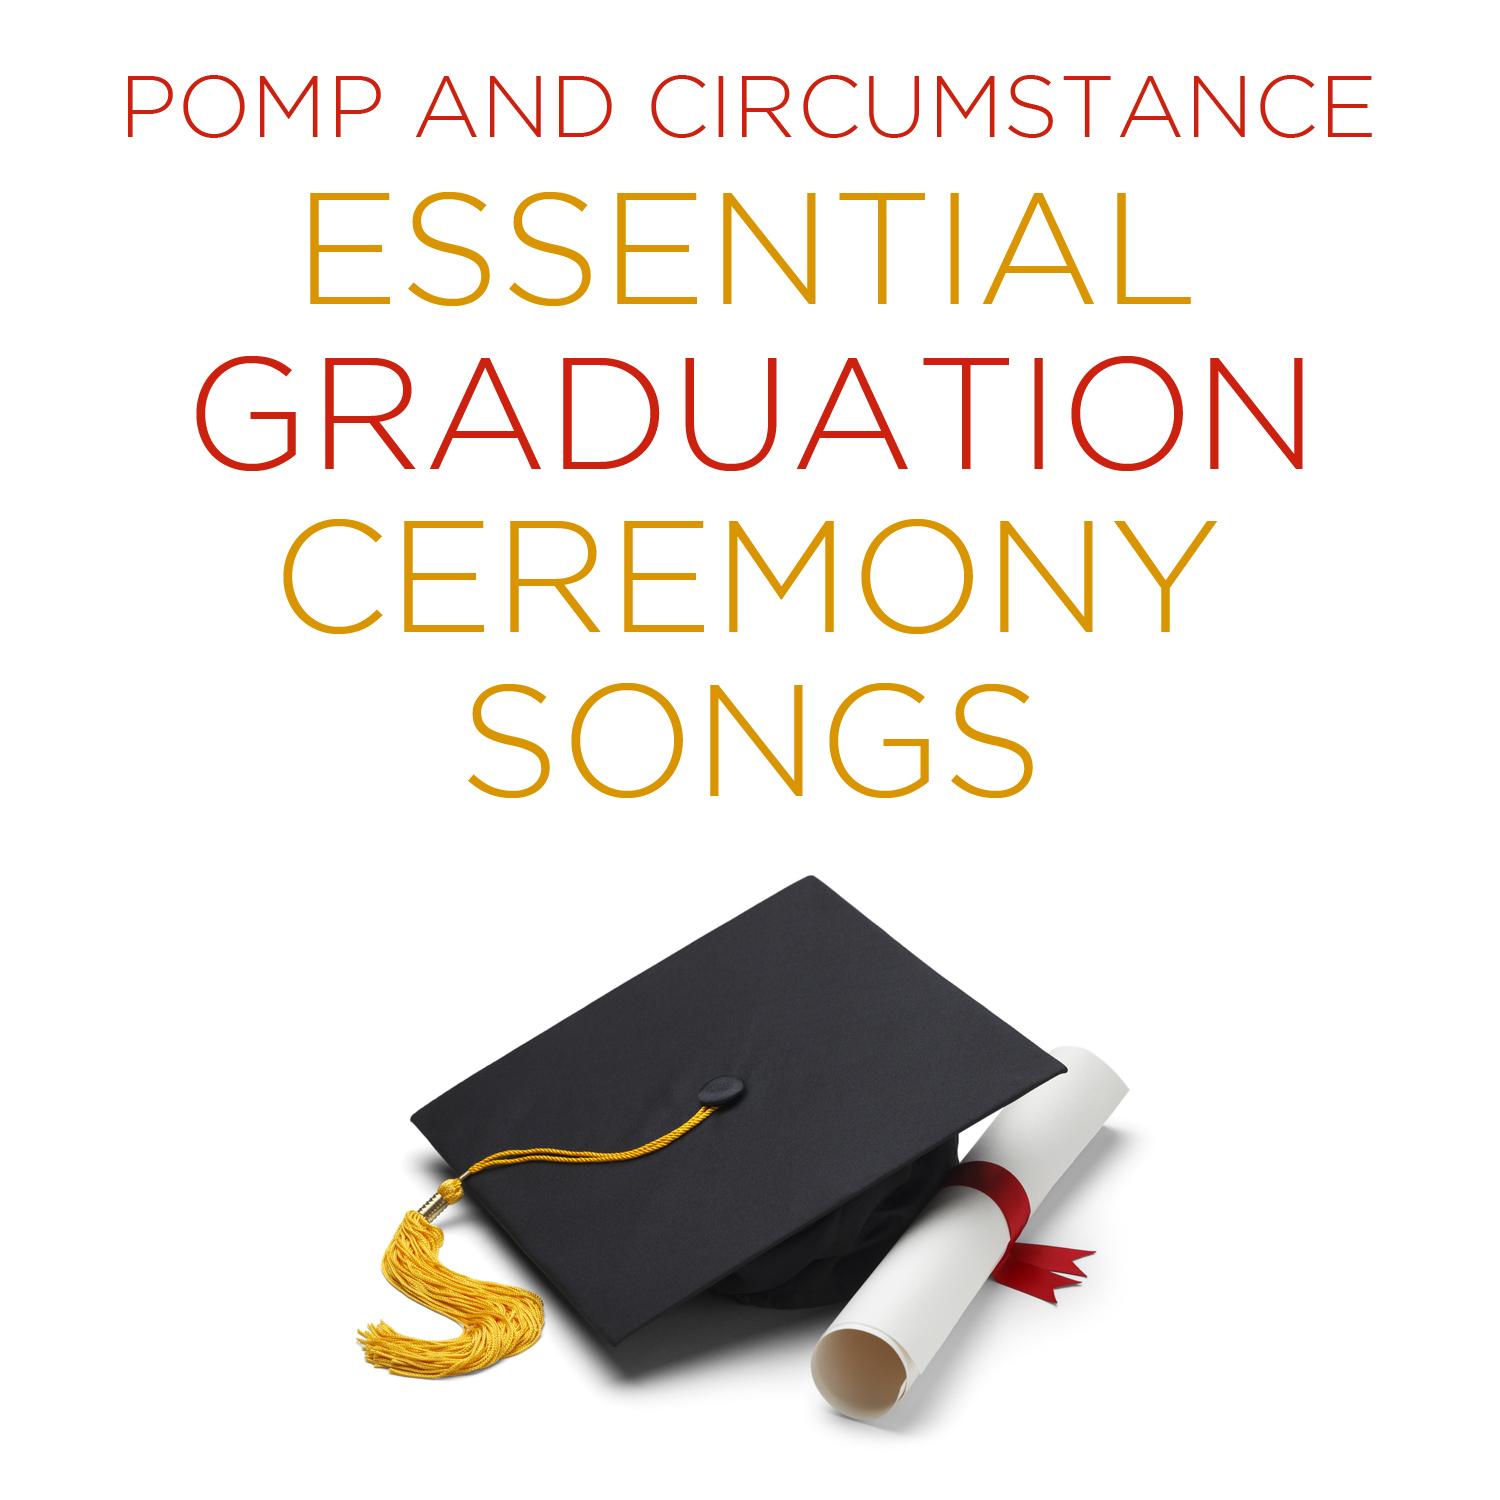 The Essential Graduation Songs: Pomp and Circumstance, Academic Festival, Climb Ev'ry Mountain, And Defying Gravity